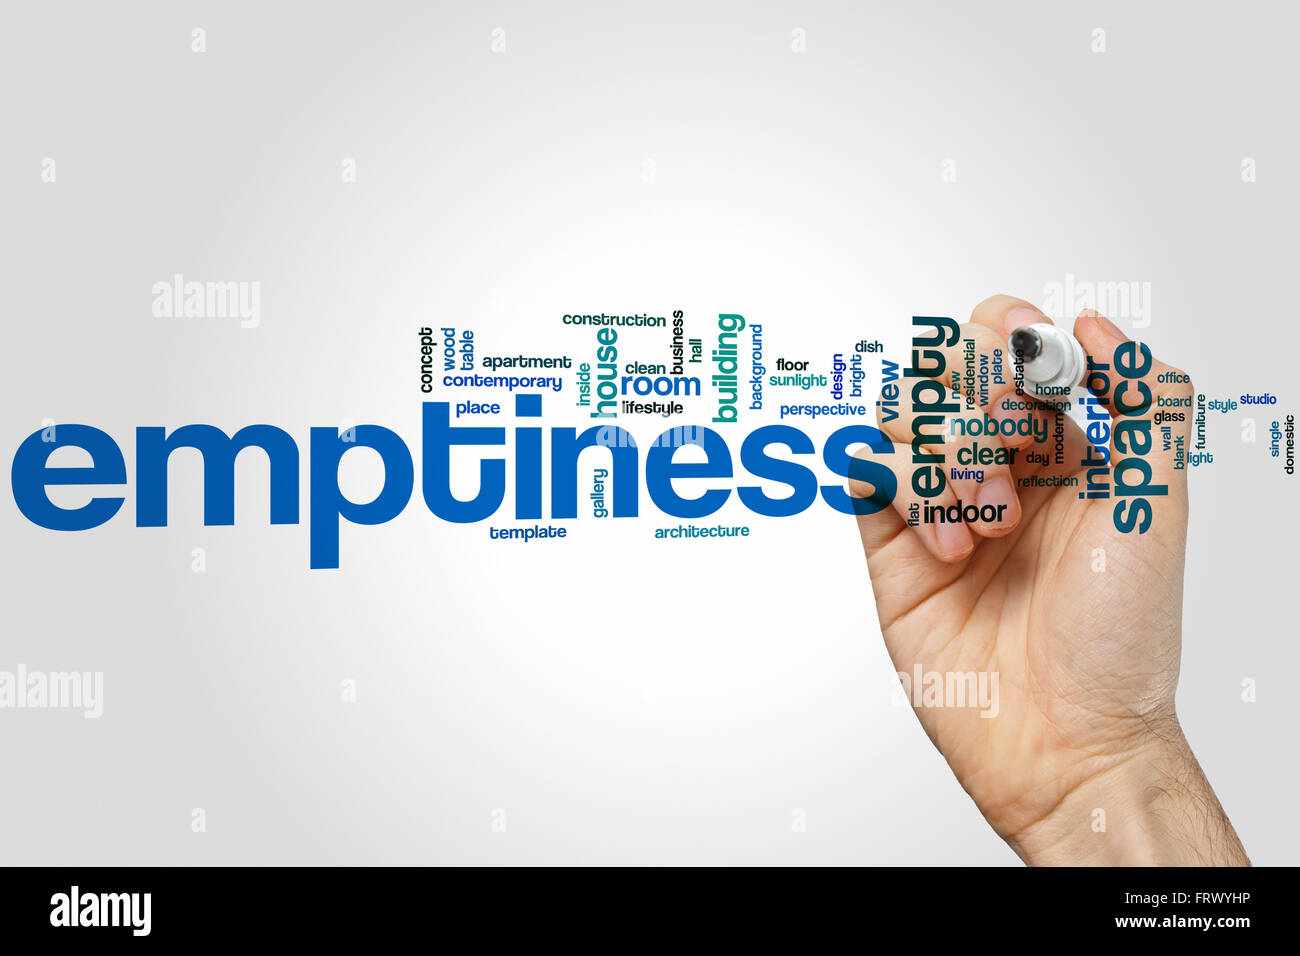 Emptiness word cloud concept with space empty related tags Stock Photo